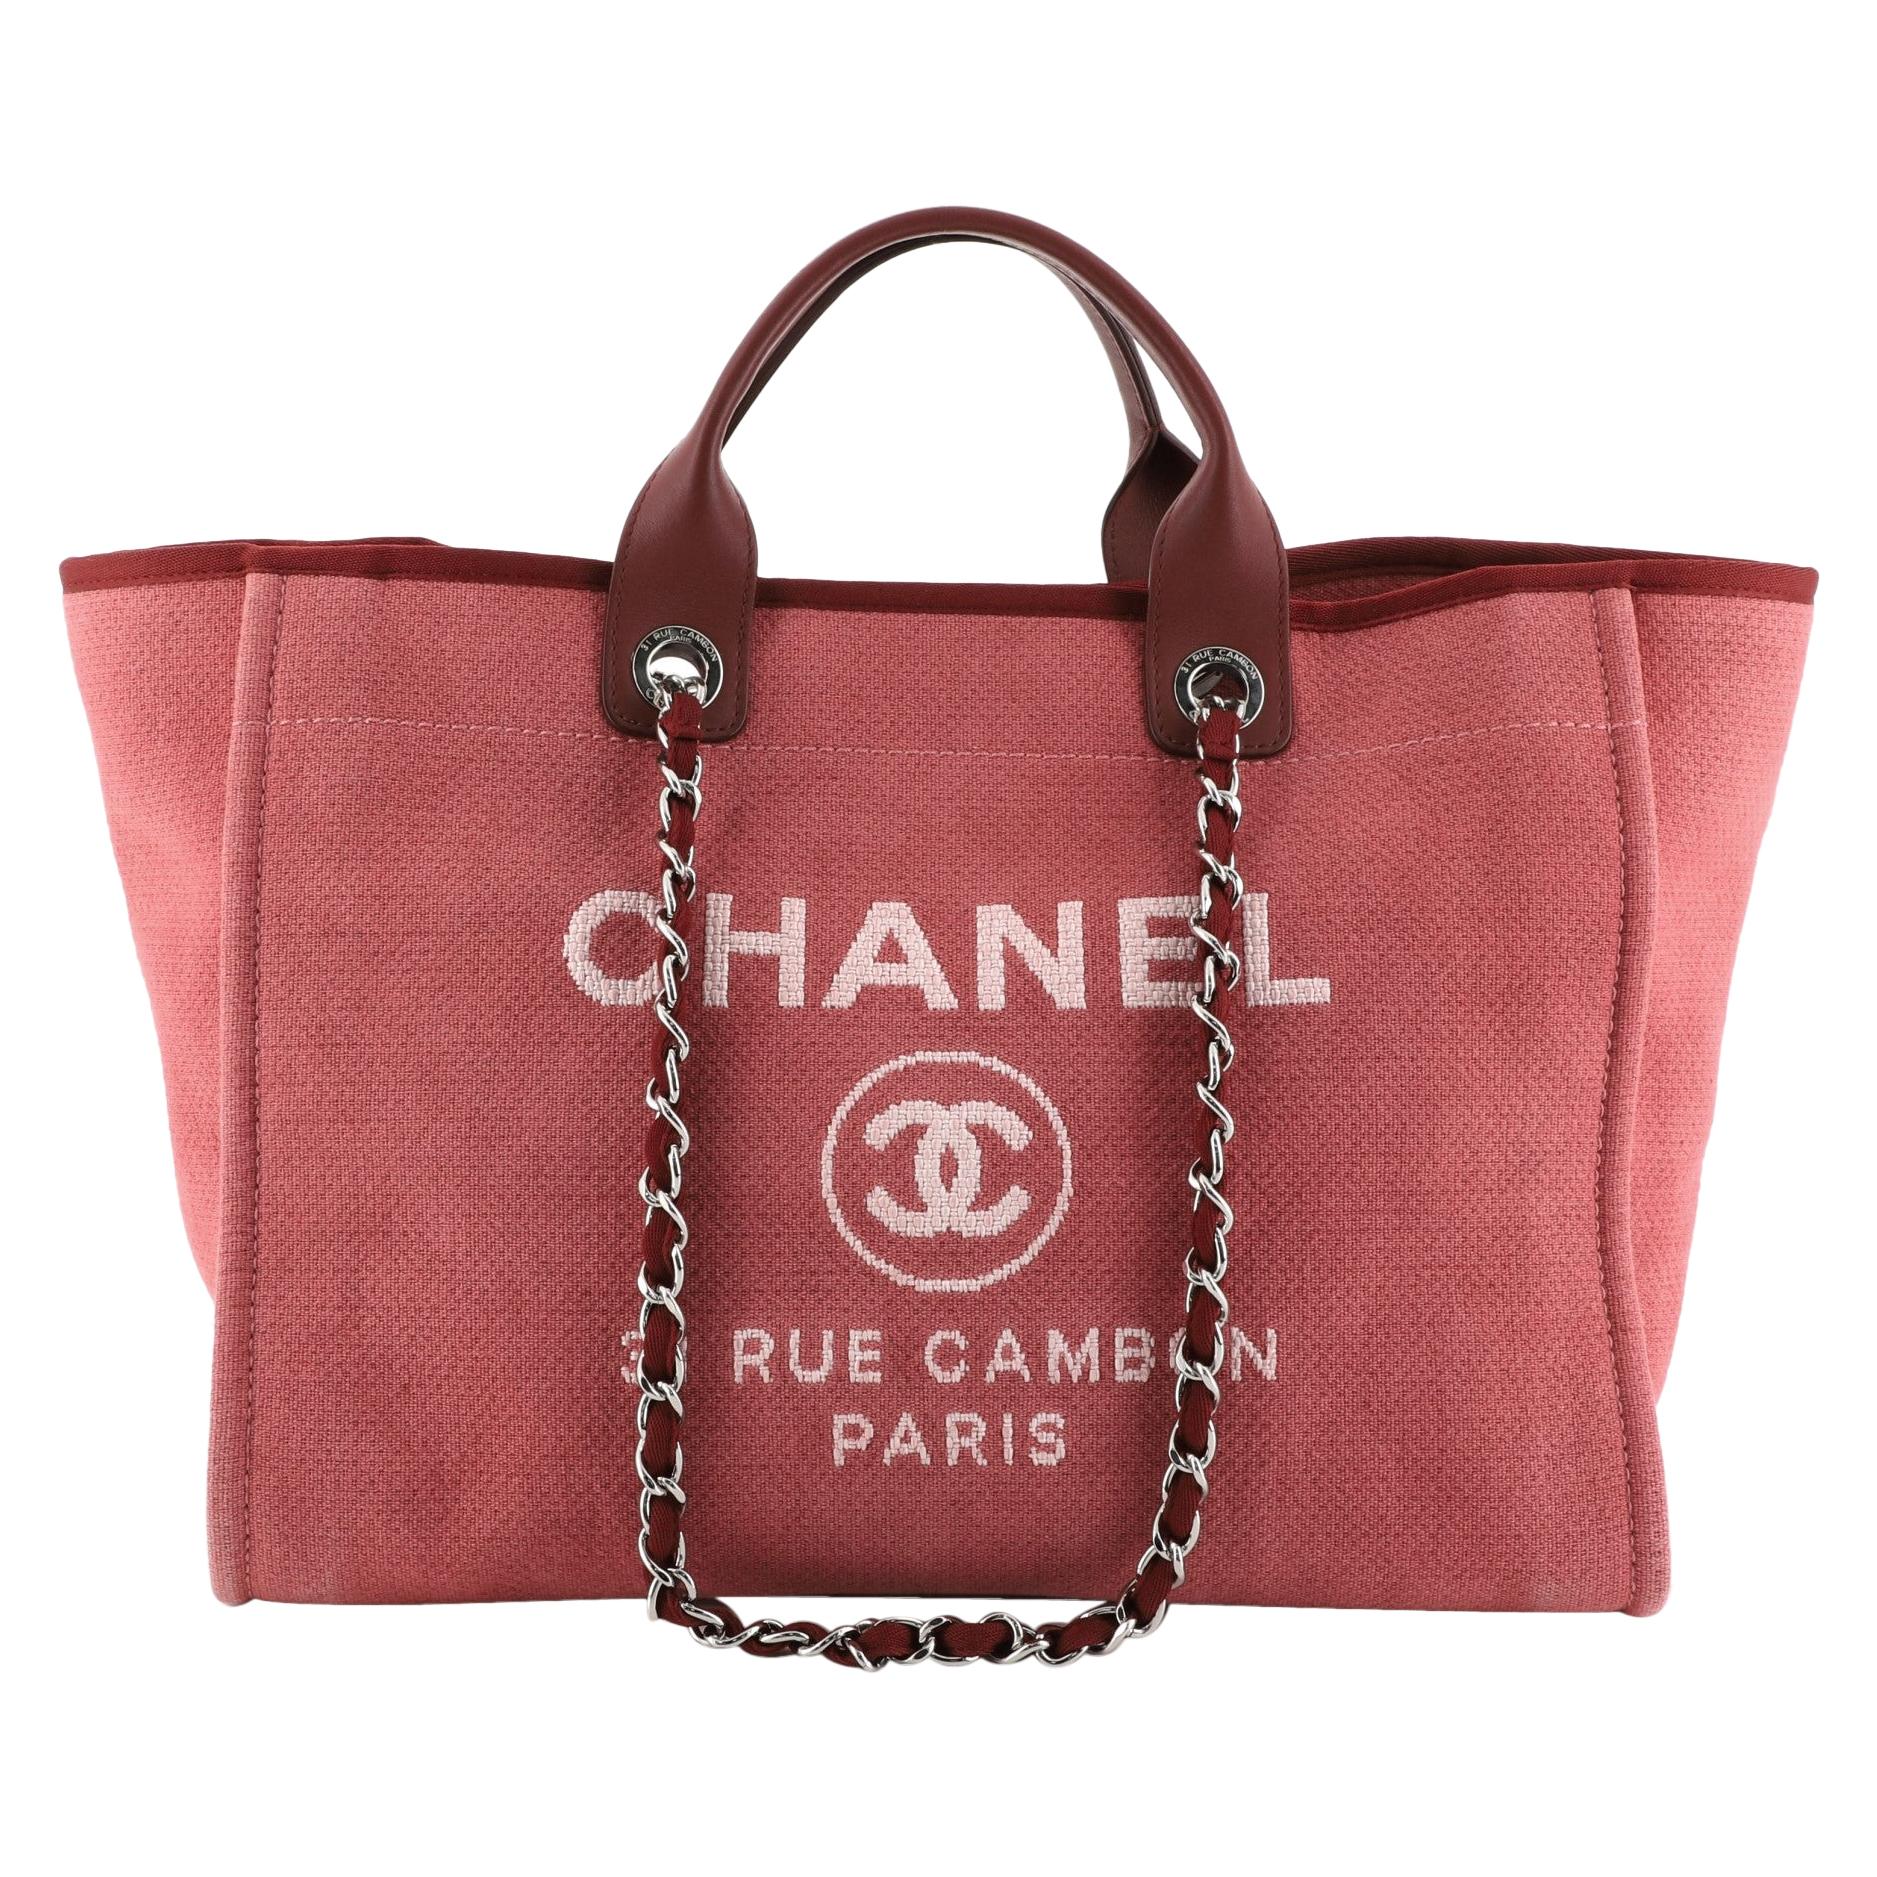 Chanel Canvas Tote Pink